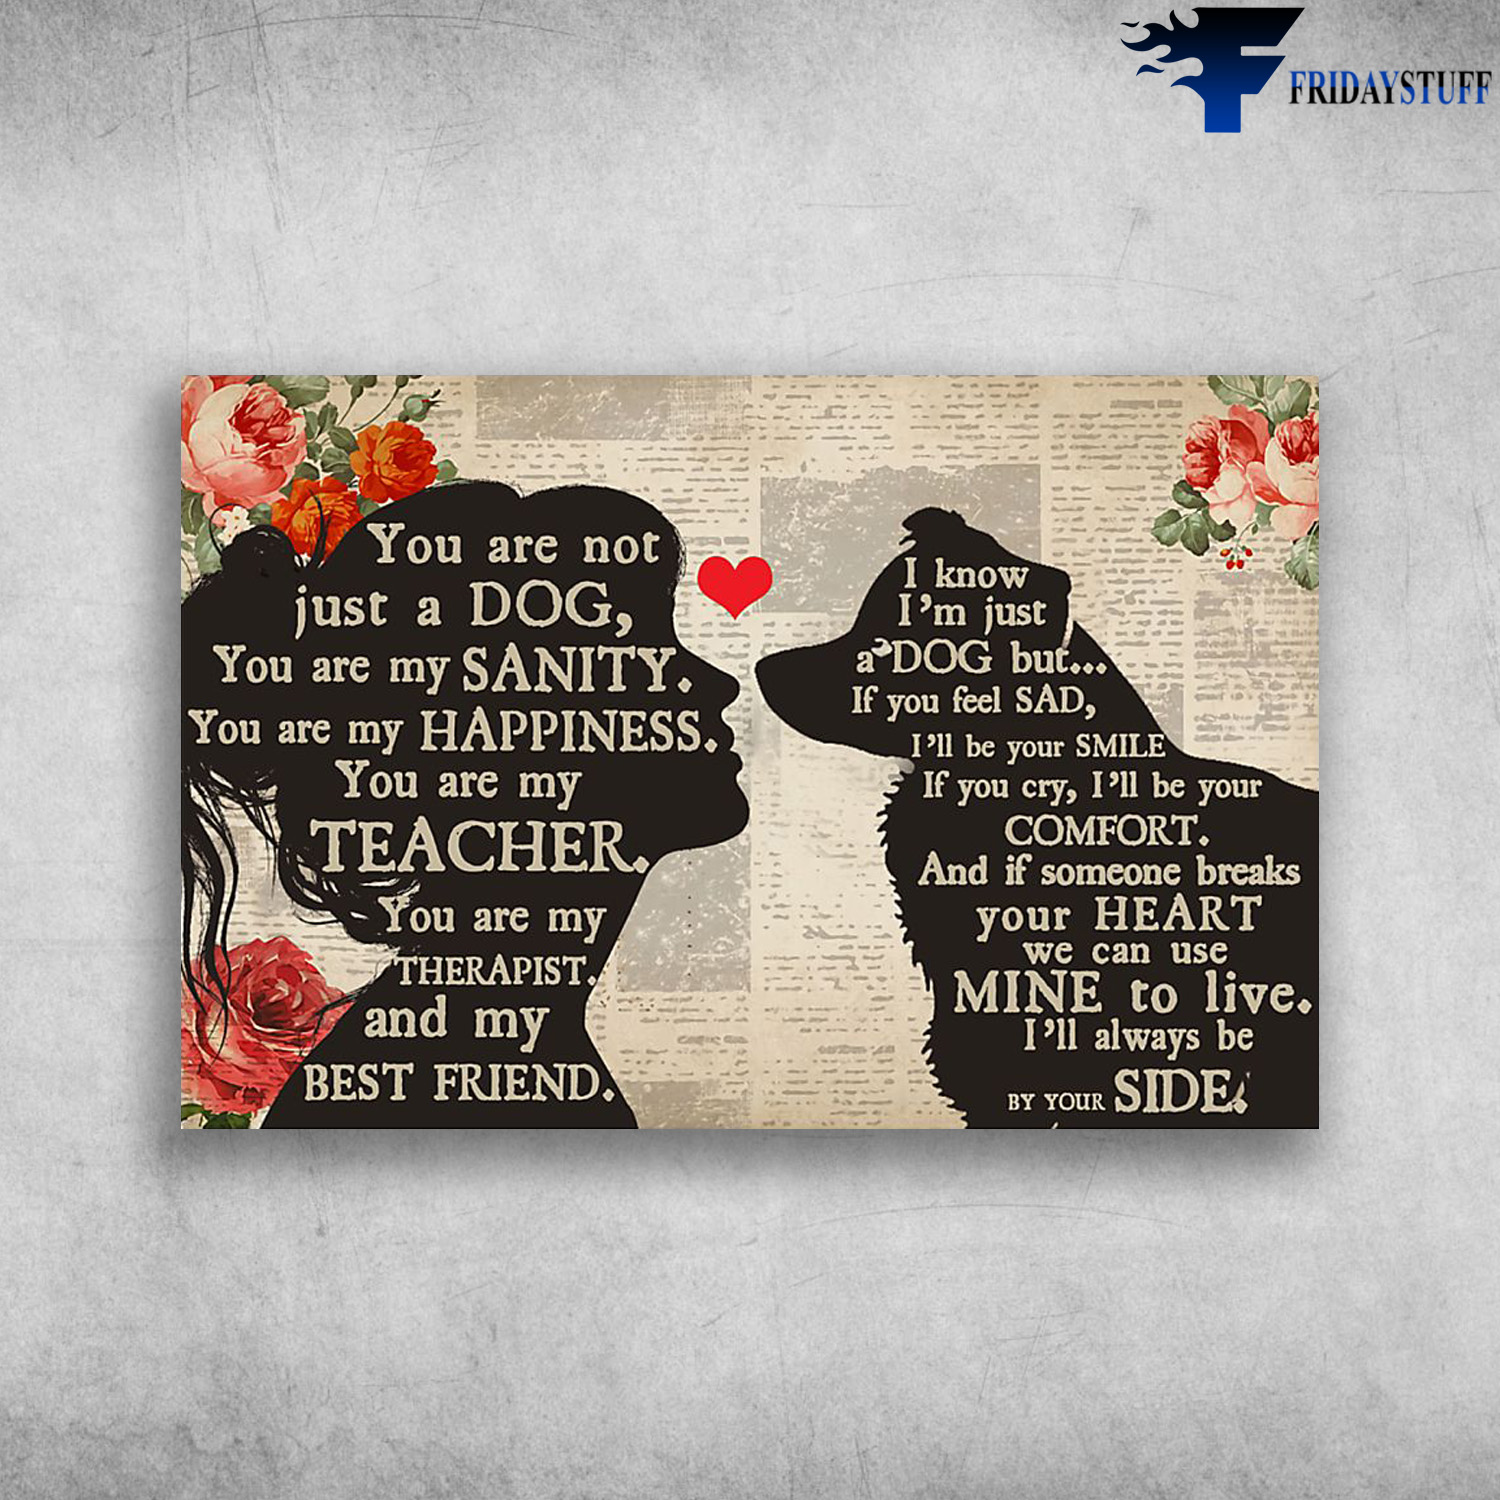 Girl Loves Border Collie - You Are Not Just A Dog, You Are My Sanity, You Are My Happiness, You Are My Teacher, You Are My Therappist, And My Best Friend, I Know I'm Just A Dog But, If You Feel Sad, I'll Be Your Smile